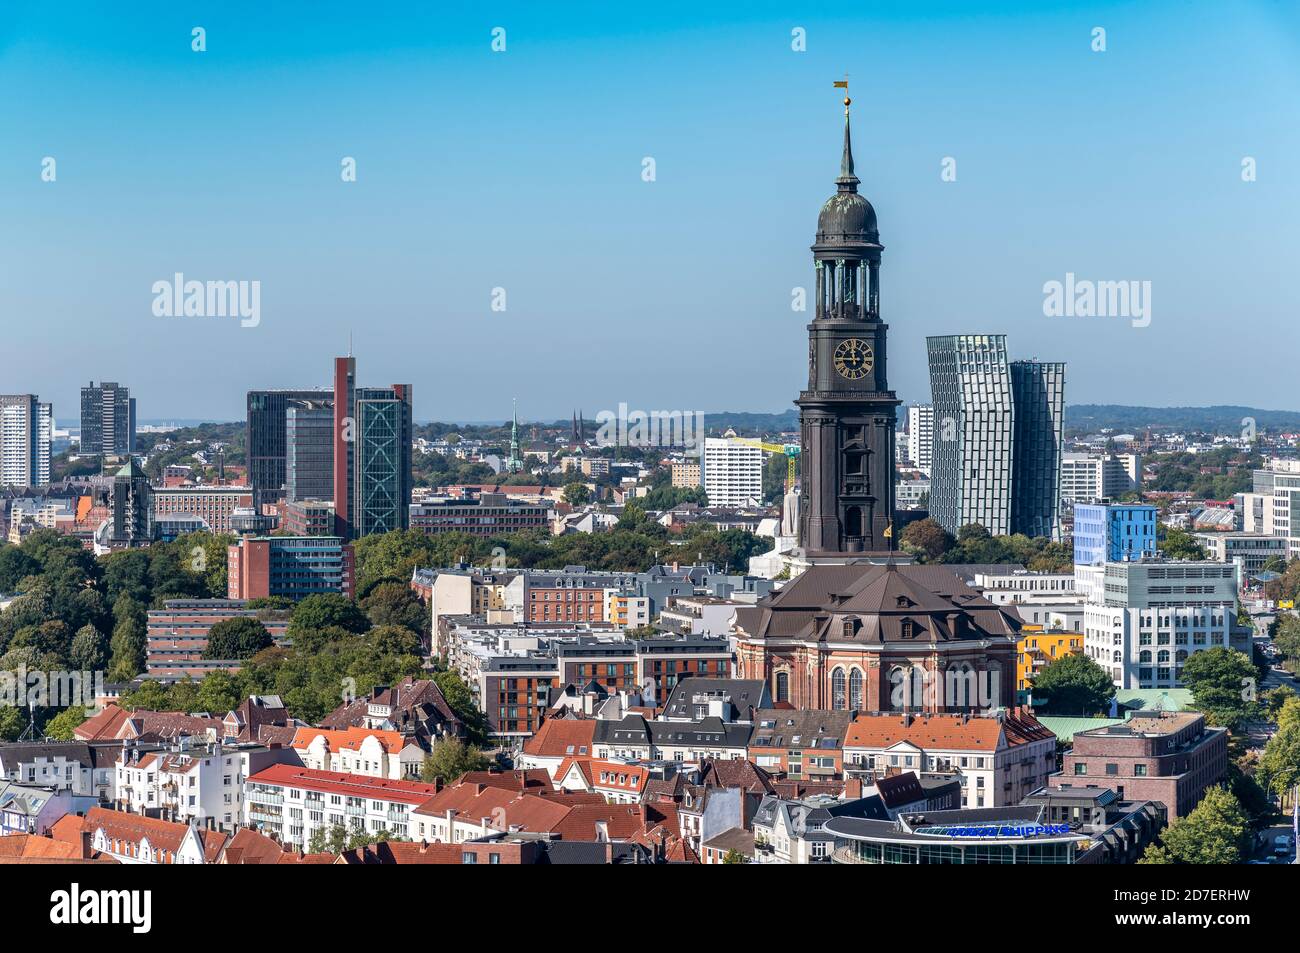 View west over the rooftops from St. Nikolai Memorial in Hamburg, to St. Michael's Church and Tanzende Türme / Tango Türme - Dancing Towers. Stock Photo